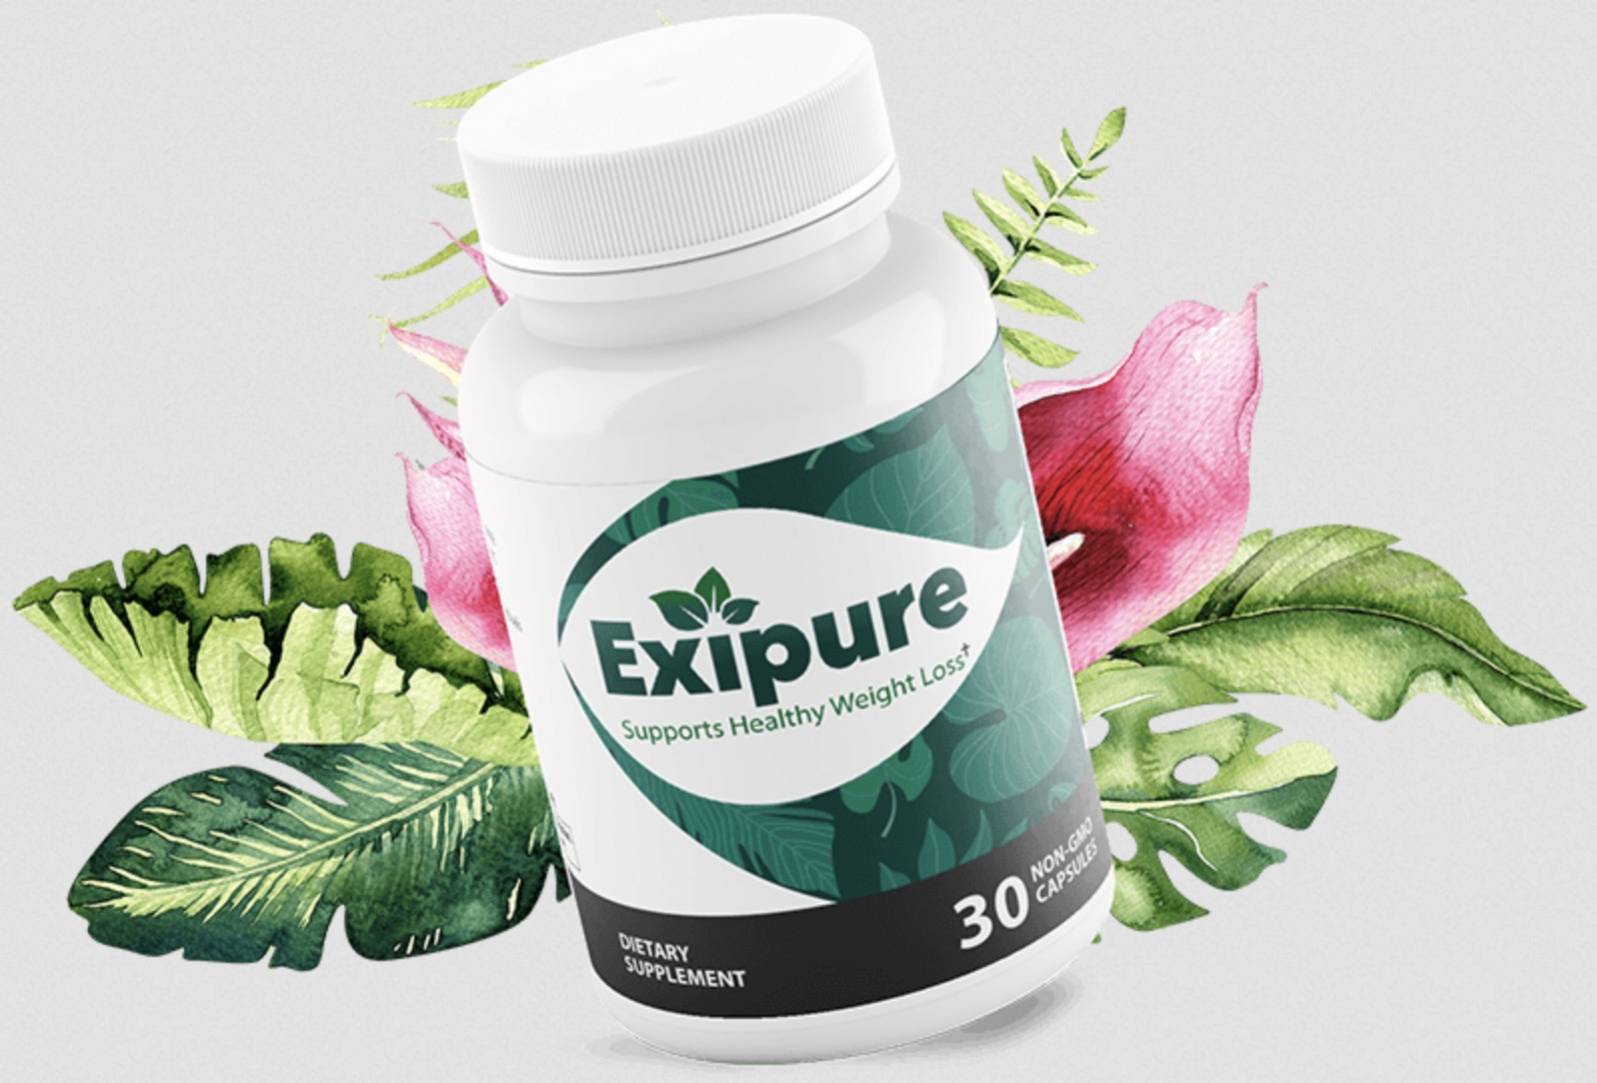 Who Invented Exipure